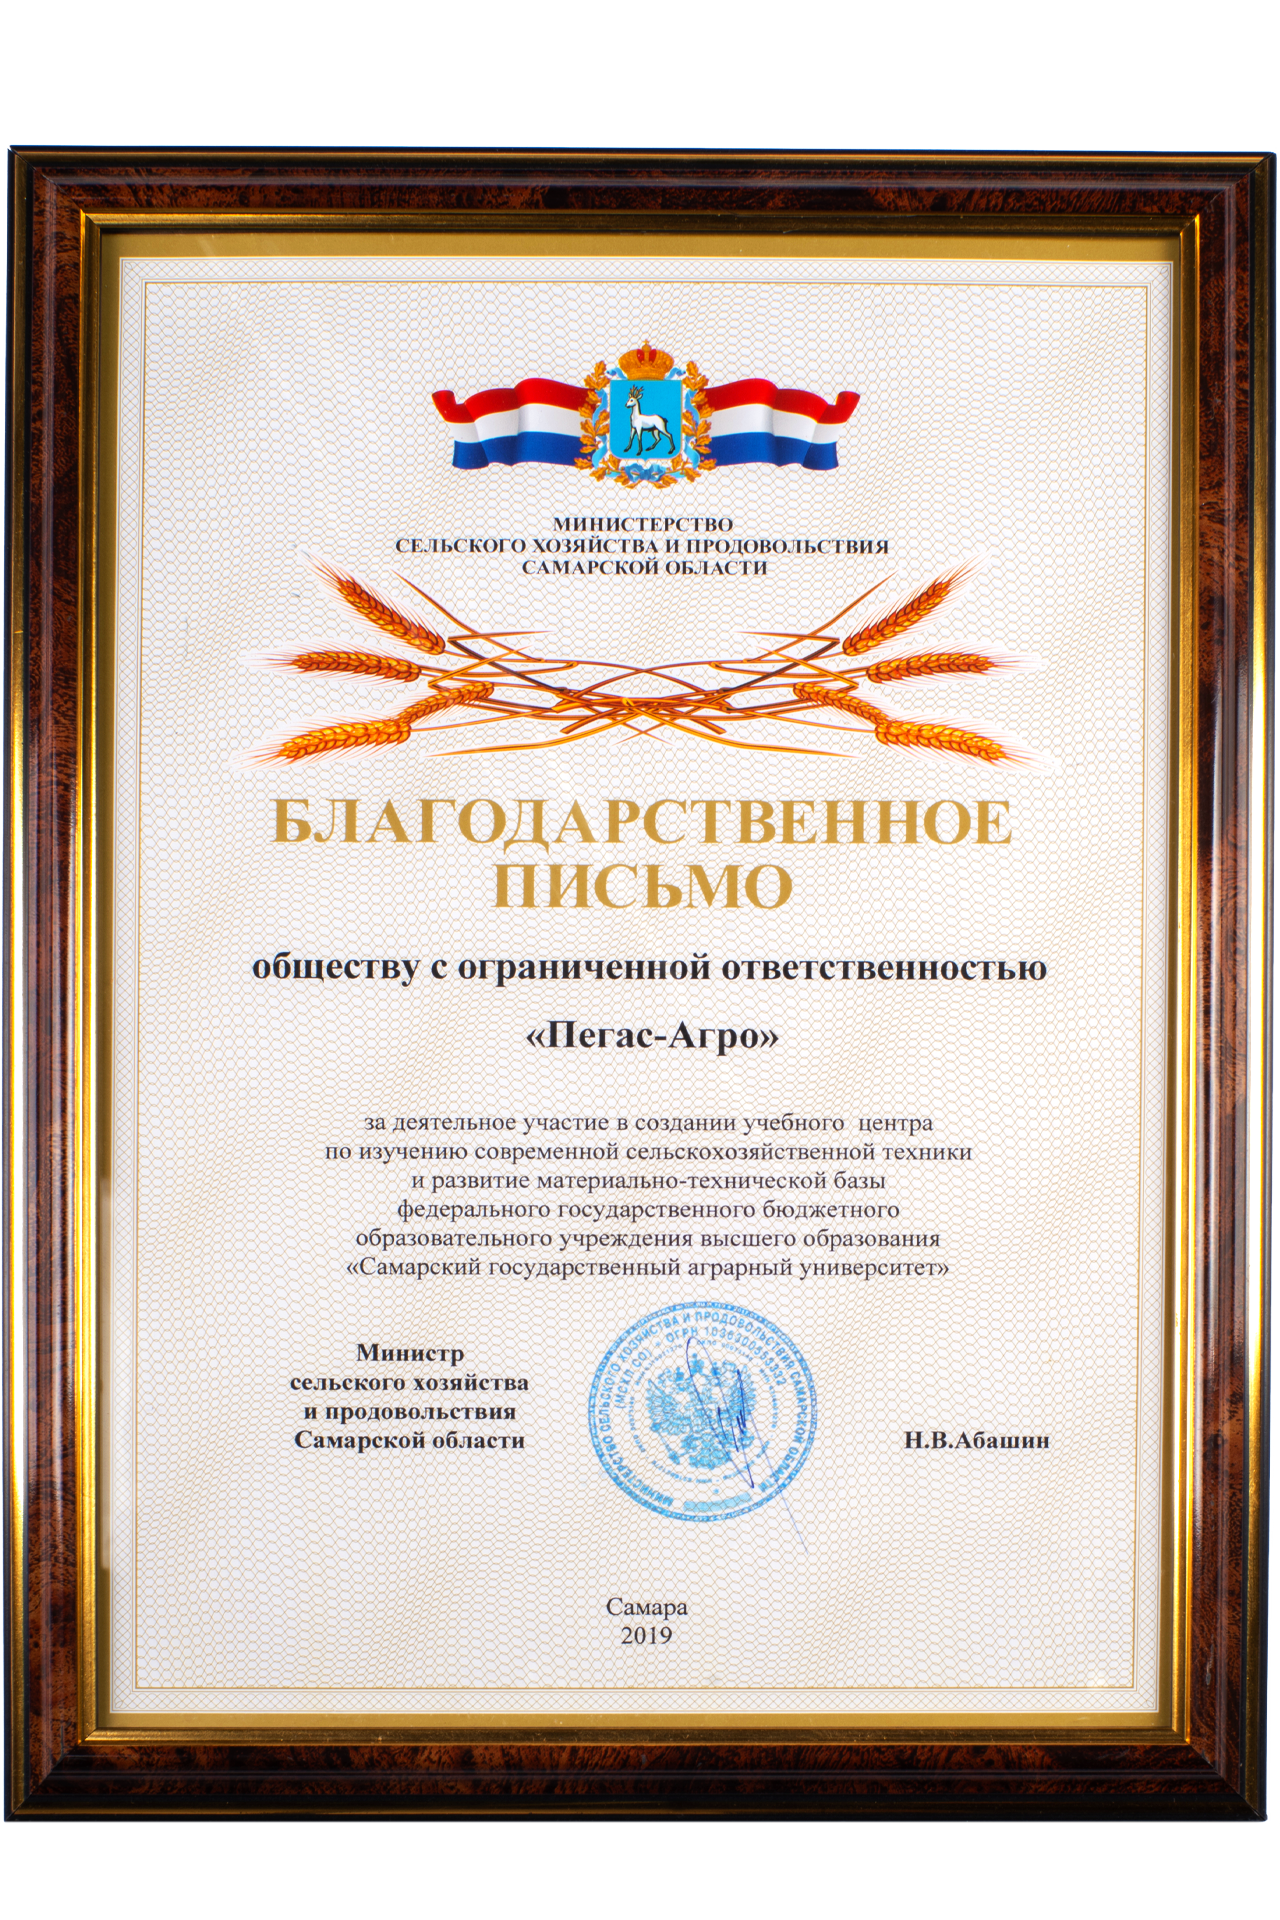 Appreciation Letter from the Minister of Agriculture and Food of the Samara Region, Samara